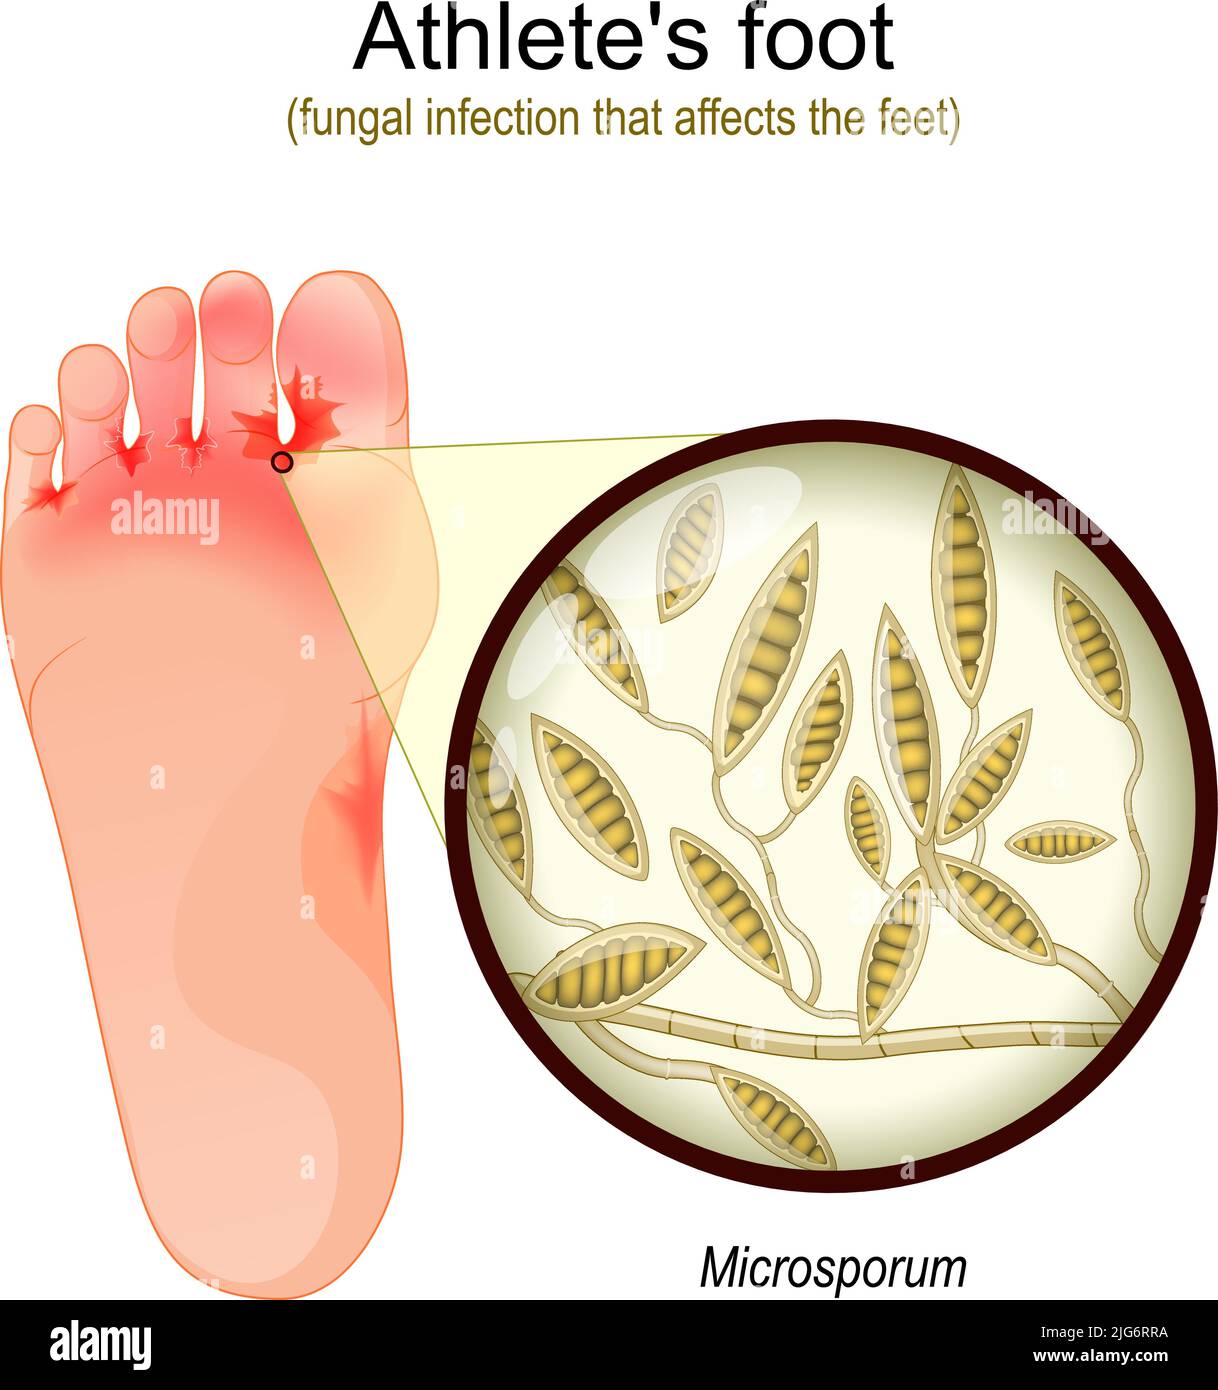 Athlete's foot. fungal infection that affects the feet. Close-up of yeast that causes infection disease of skin. Microsporum. vector illustration Stock Vector